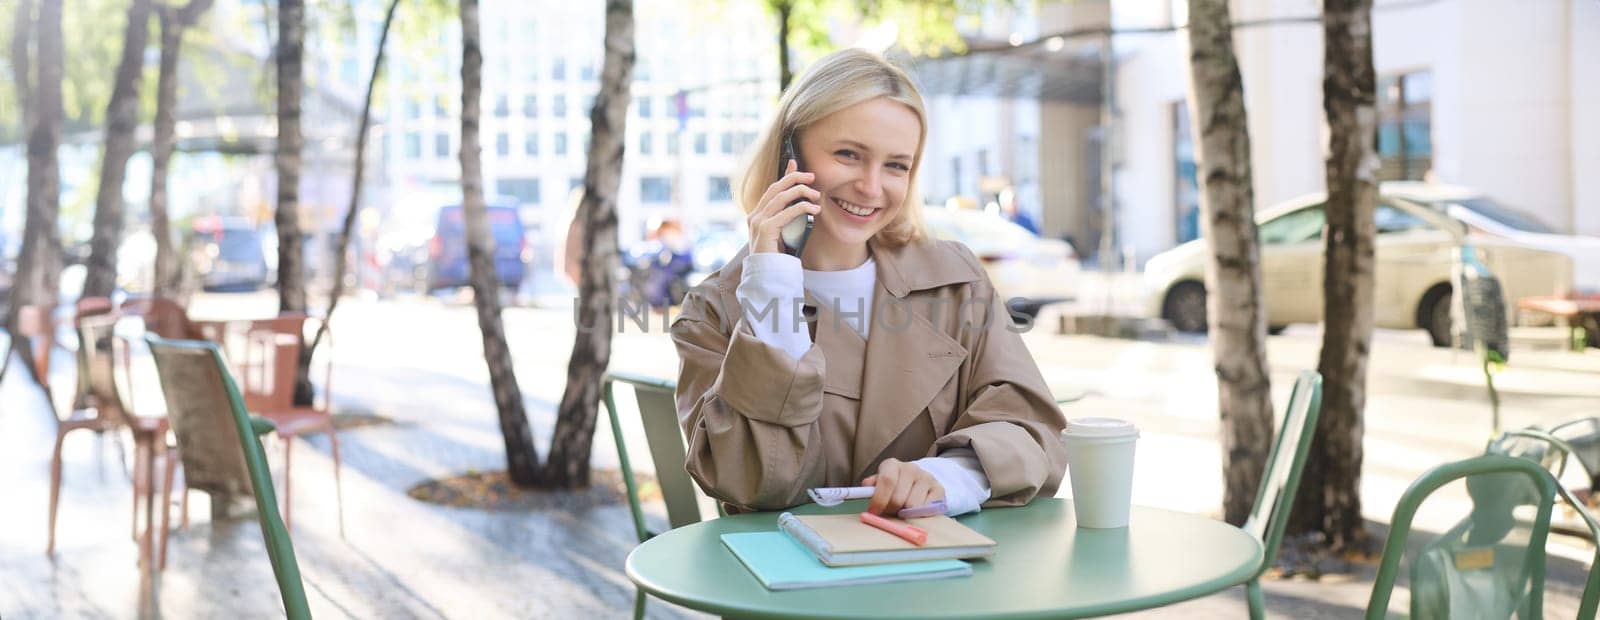 Lifestyle and urban people concept. Young smiling girl, student sitting in cafe outdoors, talking on mobile phone, chatting with friend or coworker over the telephone, studying or doing homework by Benzoix